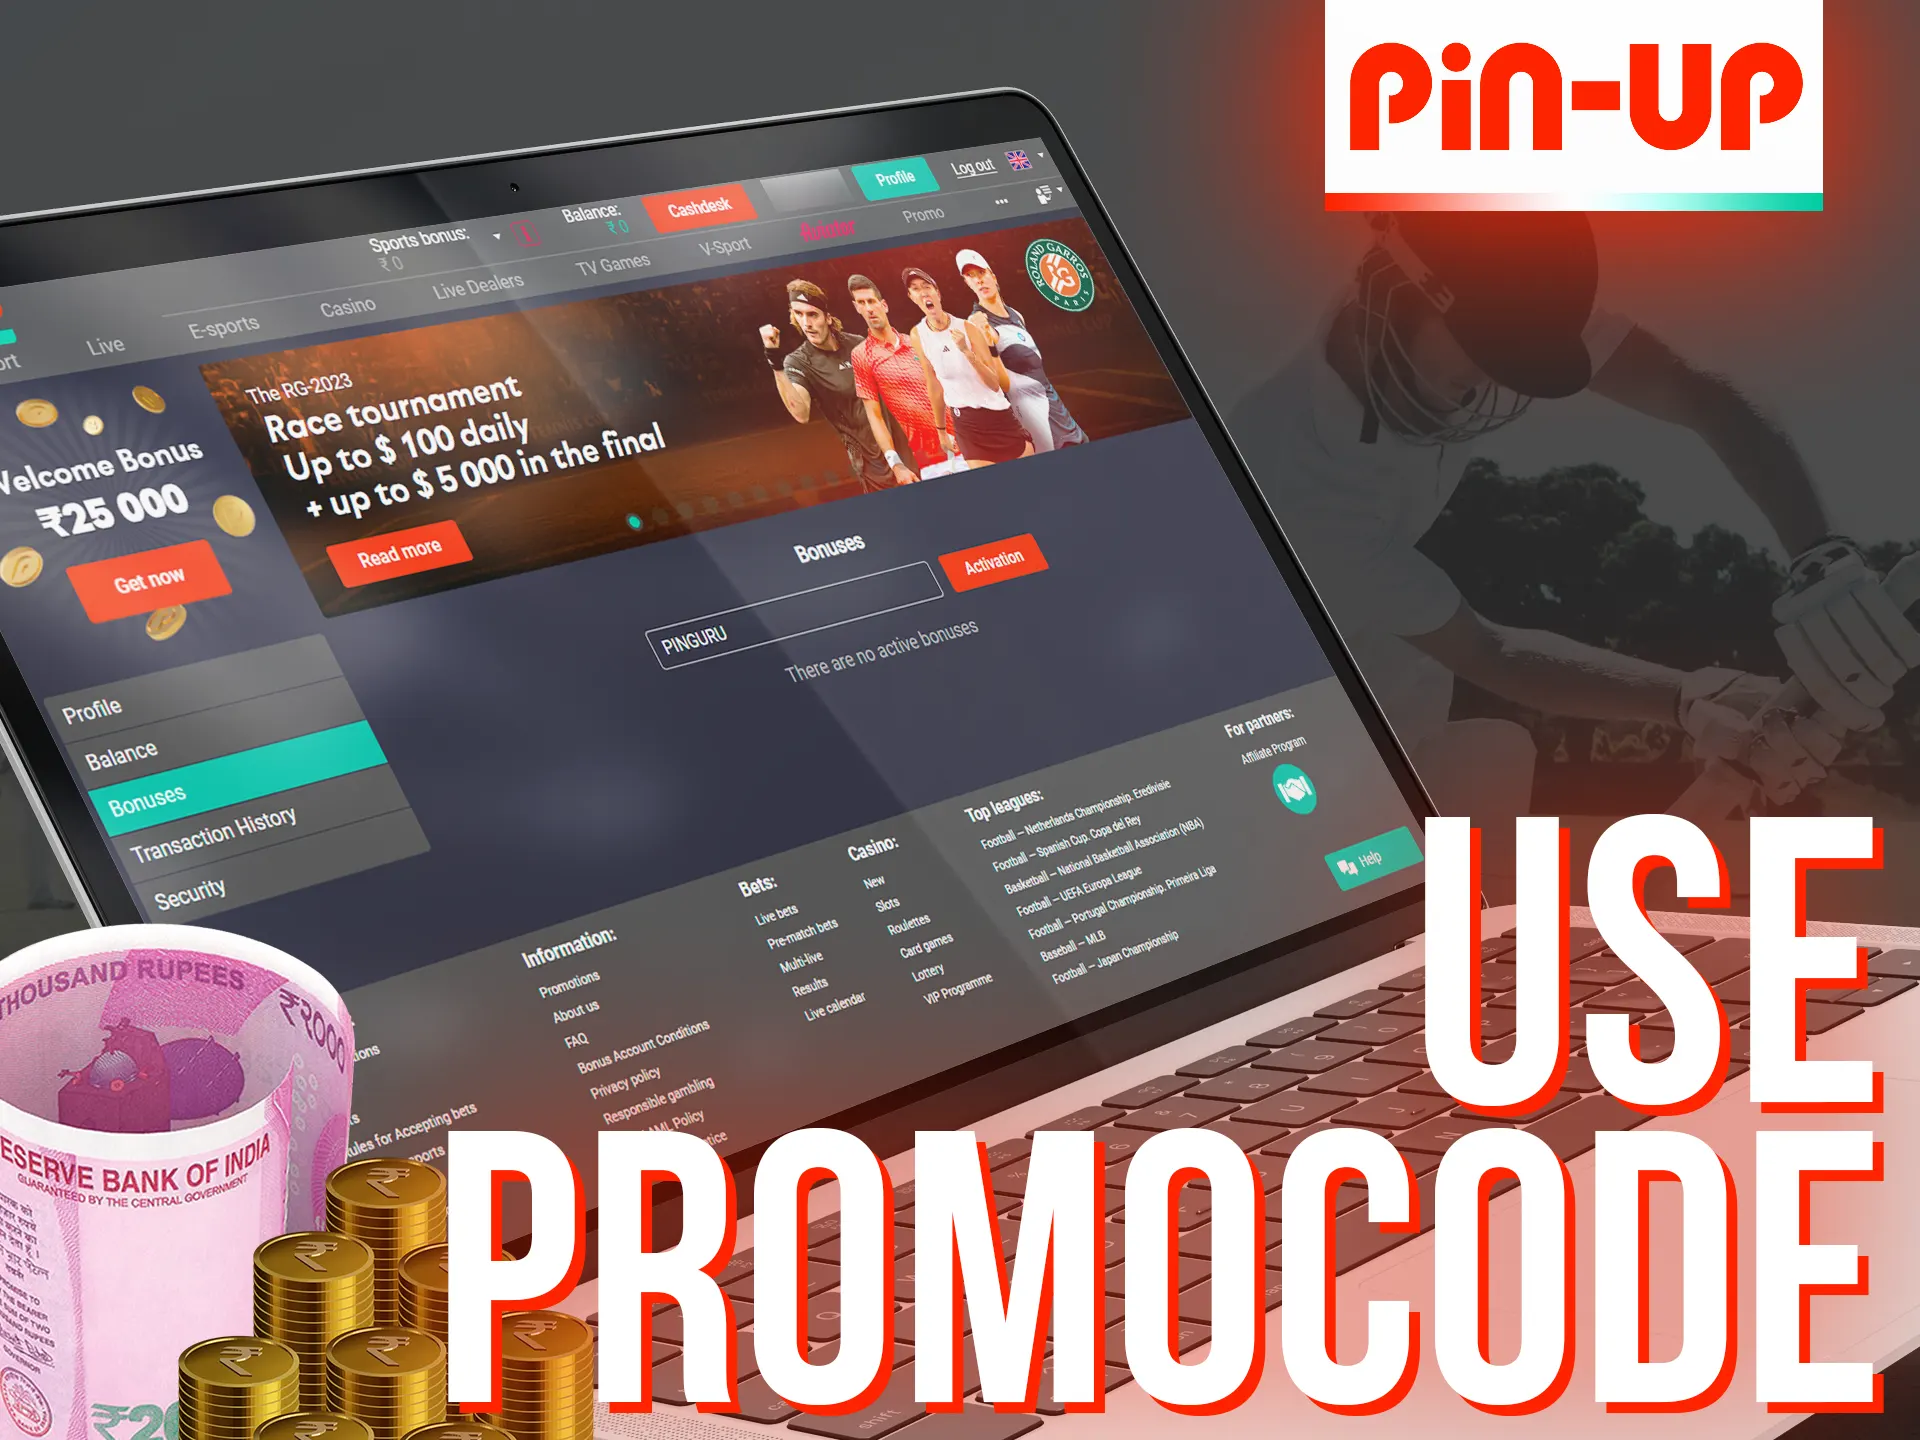 Use these instructions to get the benefits of Pin Up promo code.